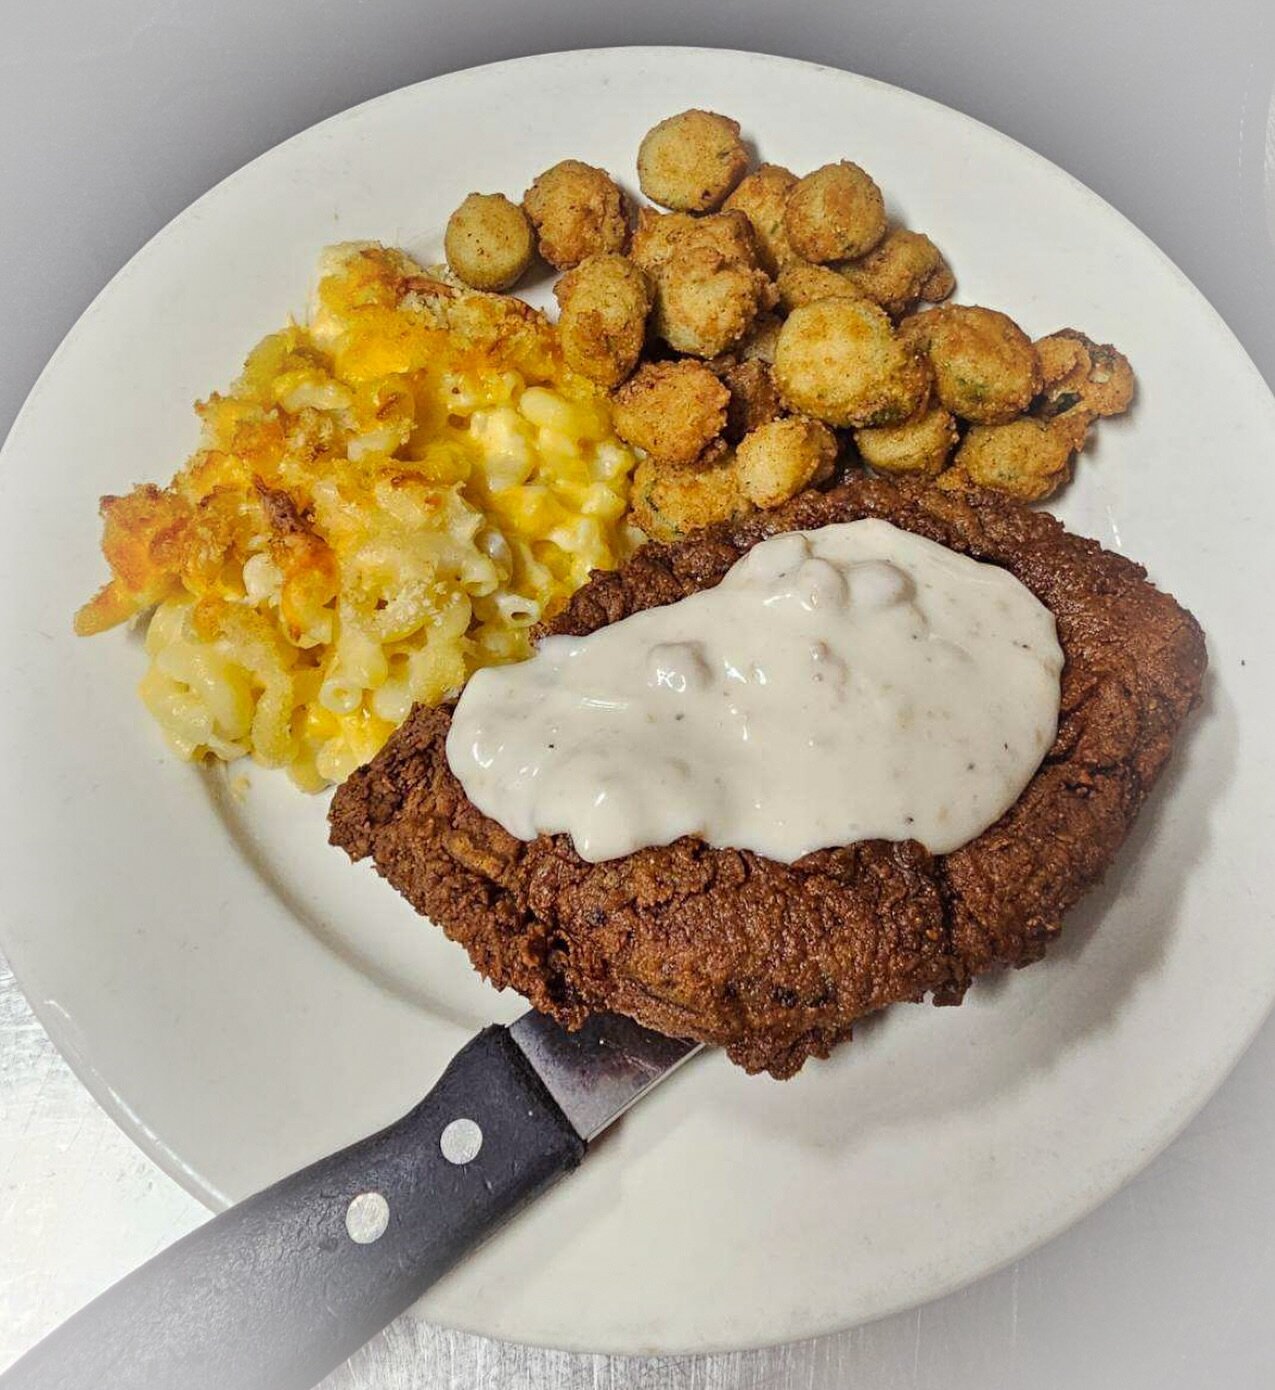 &bull;&bull;𝓛𝓾𝓷𝓬𝓱 𝓢𝓹𝓮𝓬𝓲𝓪𝓵&bull;&bull; 
Country Fried Steak🤤 
&mdash; 7oz Fried Ribeye topped with country gravy and served with Mac &amp; Cheese and Fried Okra. Available all week! 

#lunchspecial #countryfriedsteak #macandcheese #pawley